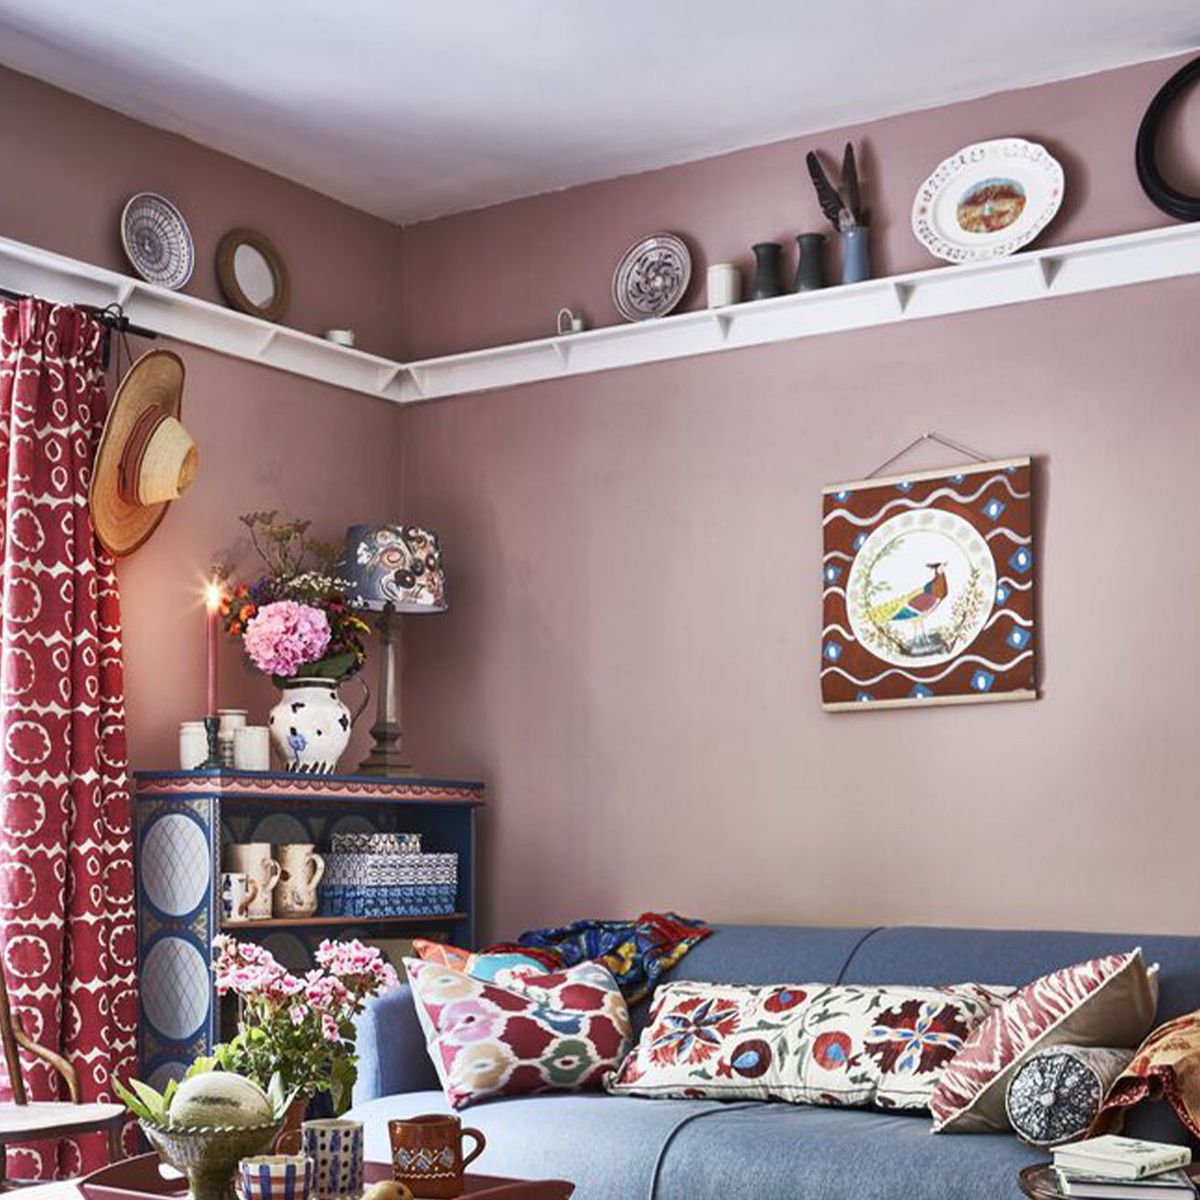 Pastel paint colors are staying as a trend as we crave playfulness at home